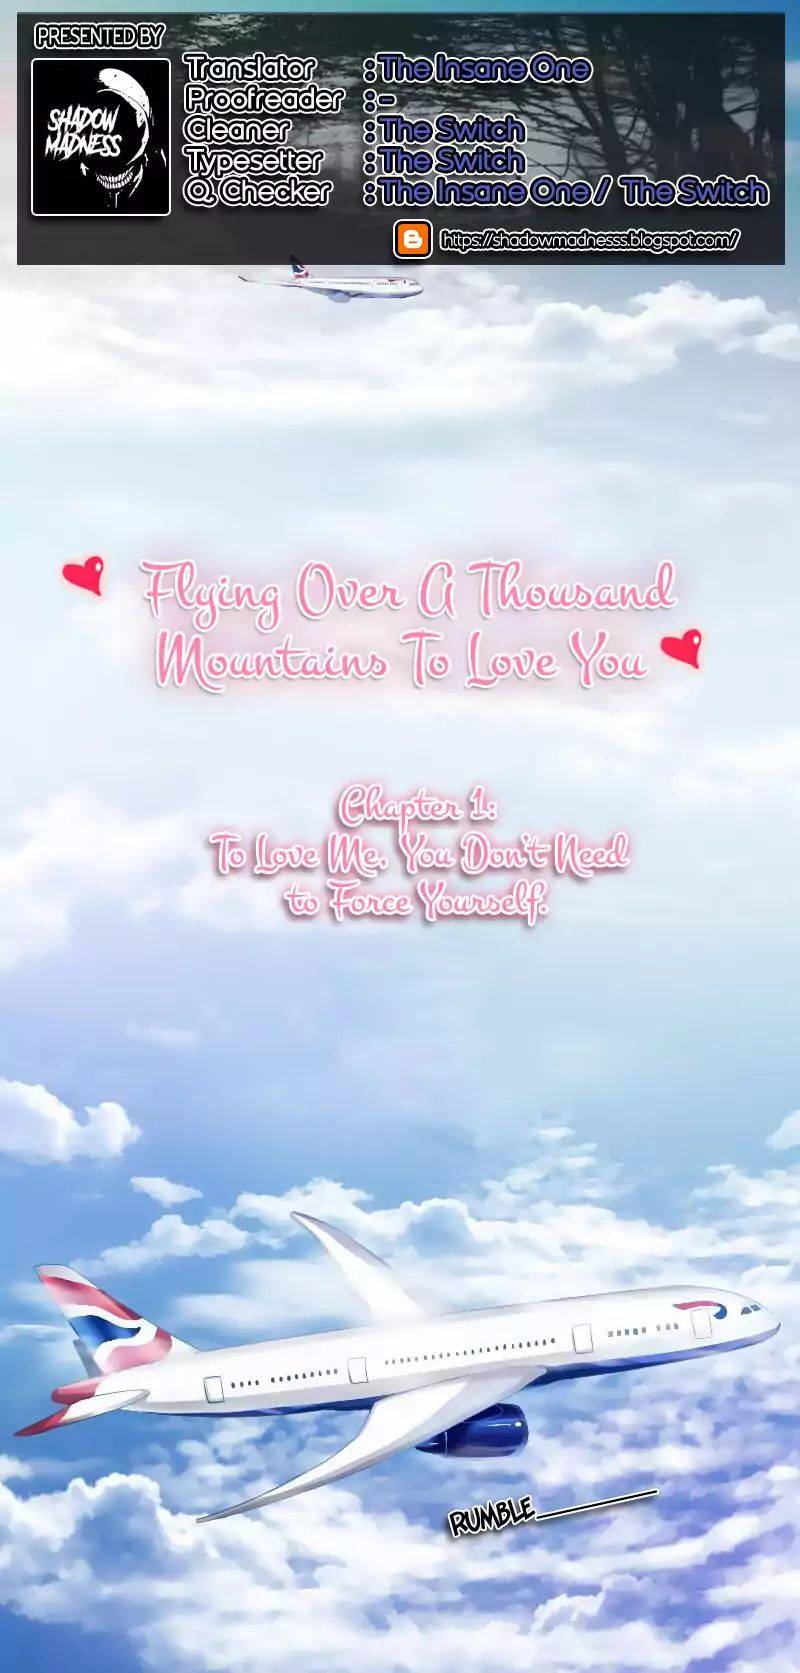 flying_over_a_thousand_mountains_to_love_you_1_2